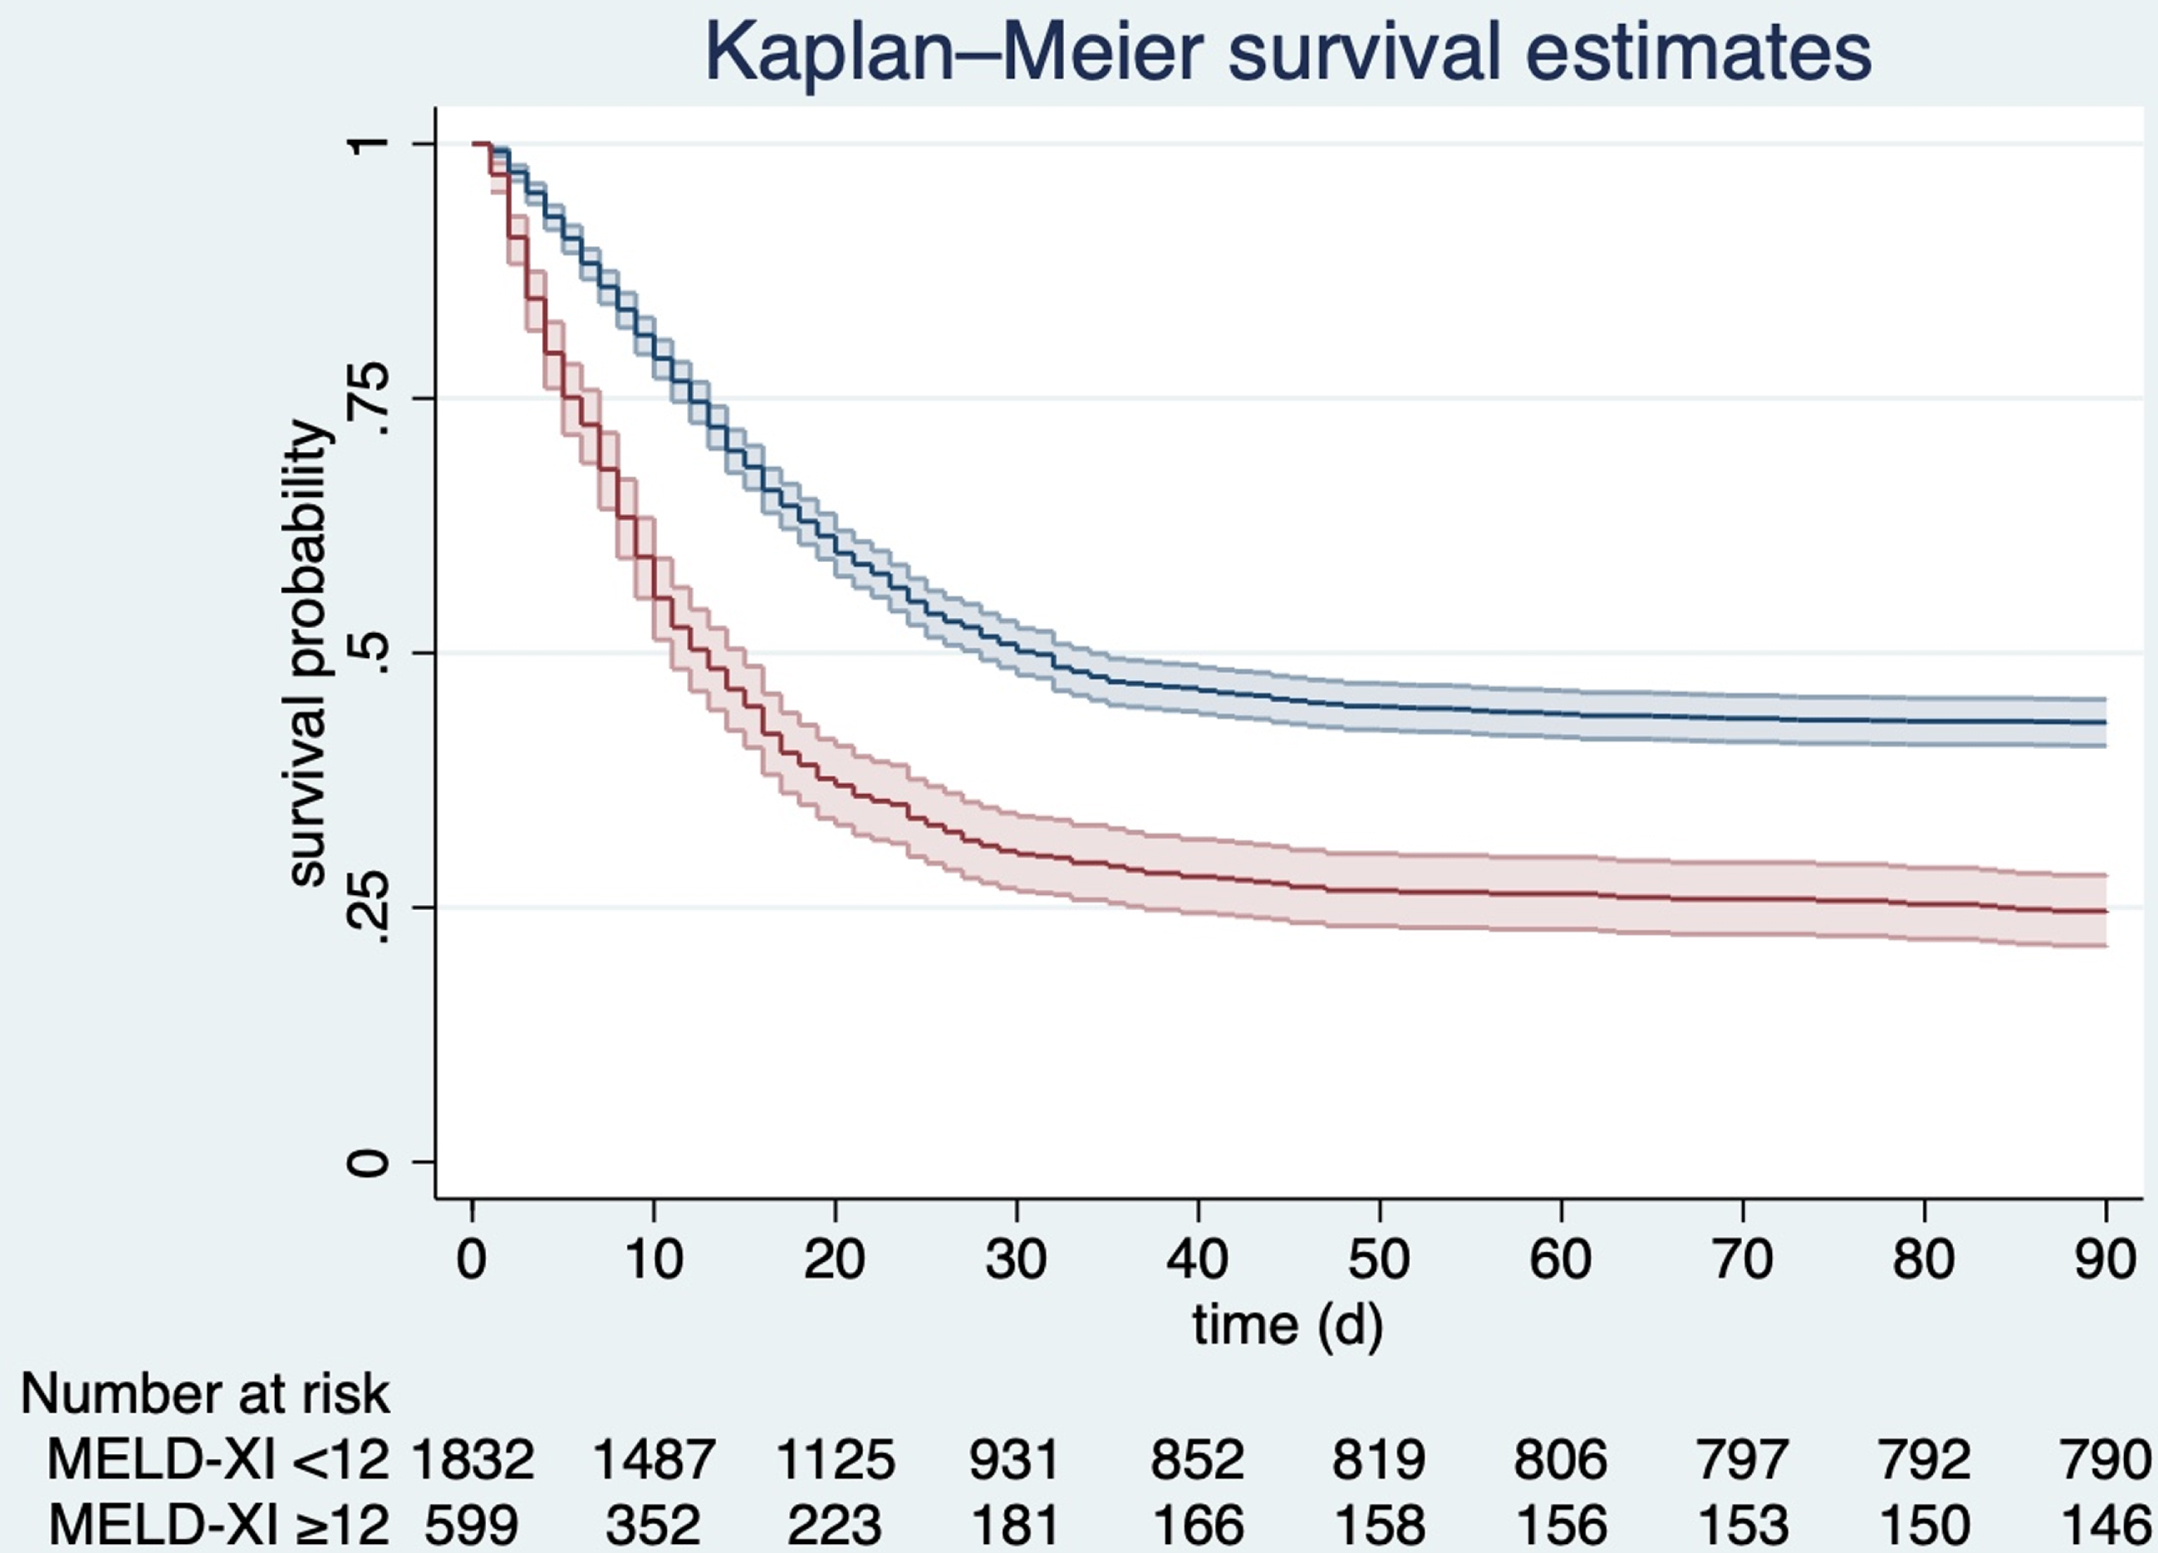 Kaplan-Meyer survival estimates for patients with MELD-XI <12 (blue line) and MELD-XI≥12 (red line), p < 0.001; MELD - Model for End-Stage Liver Disease.